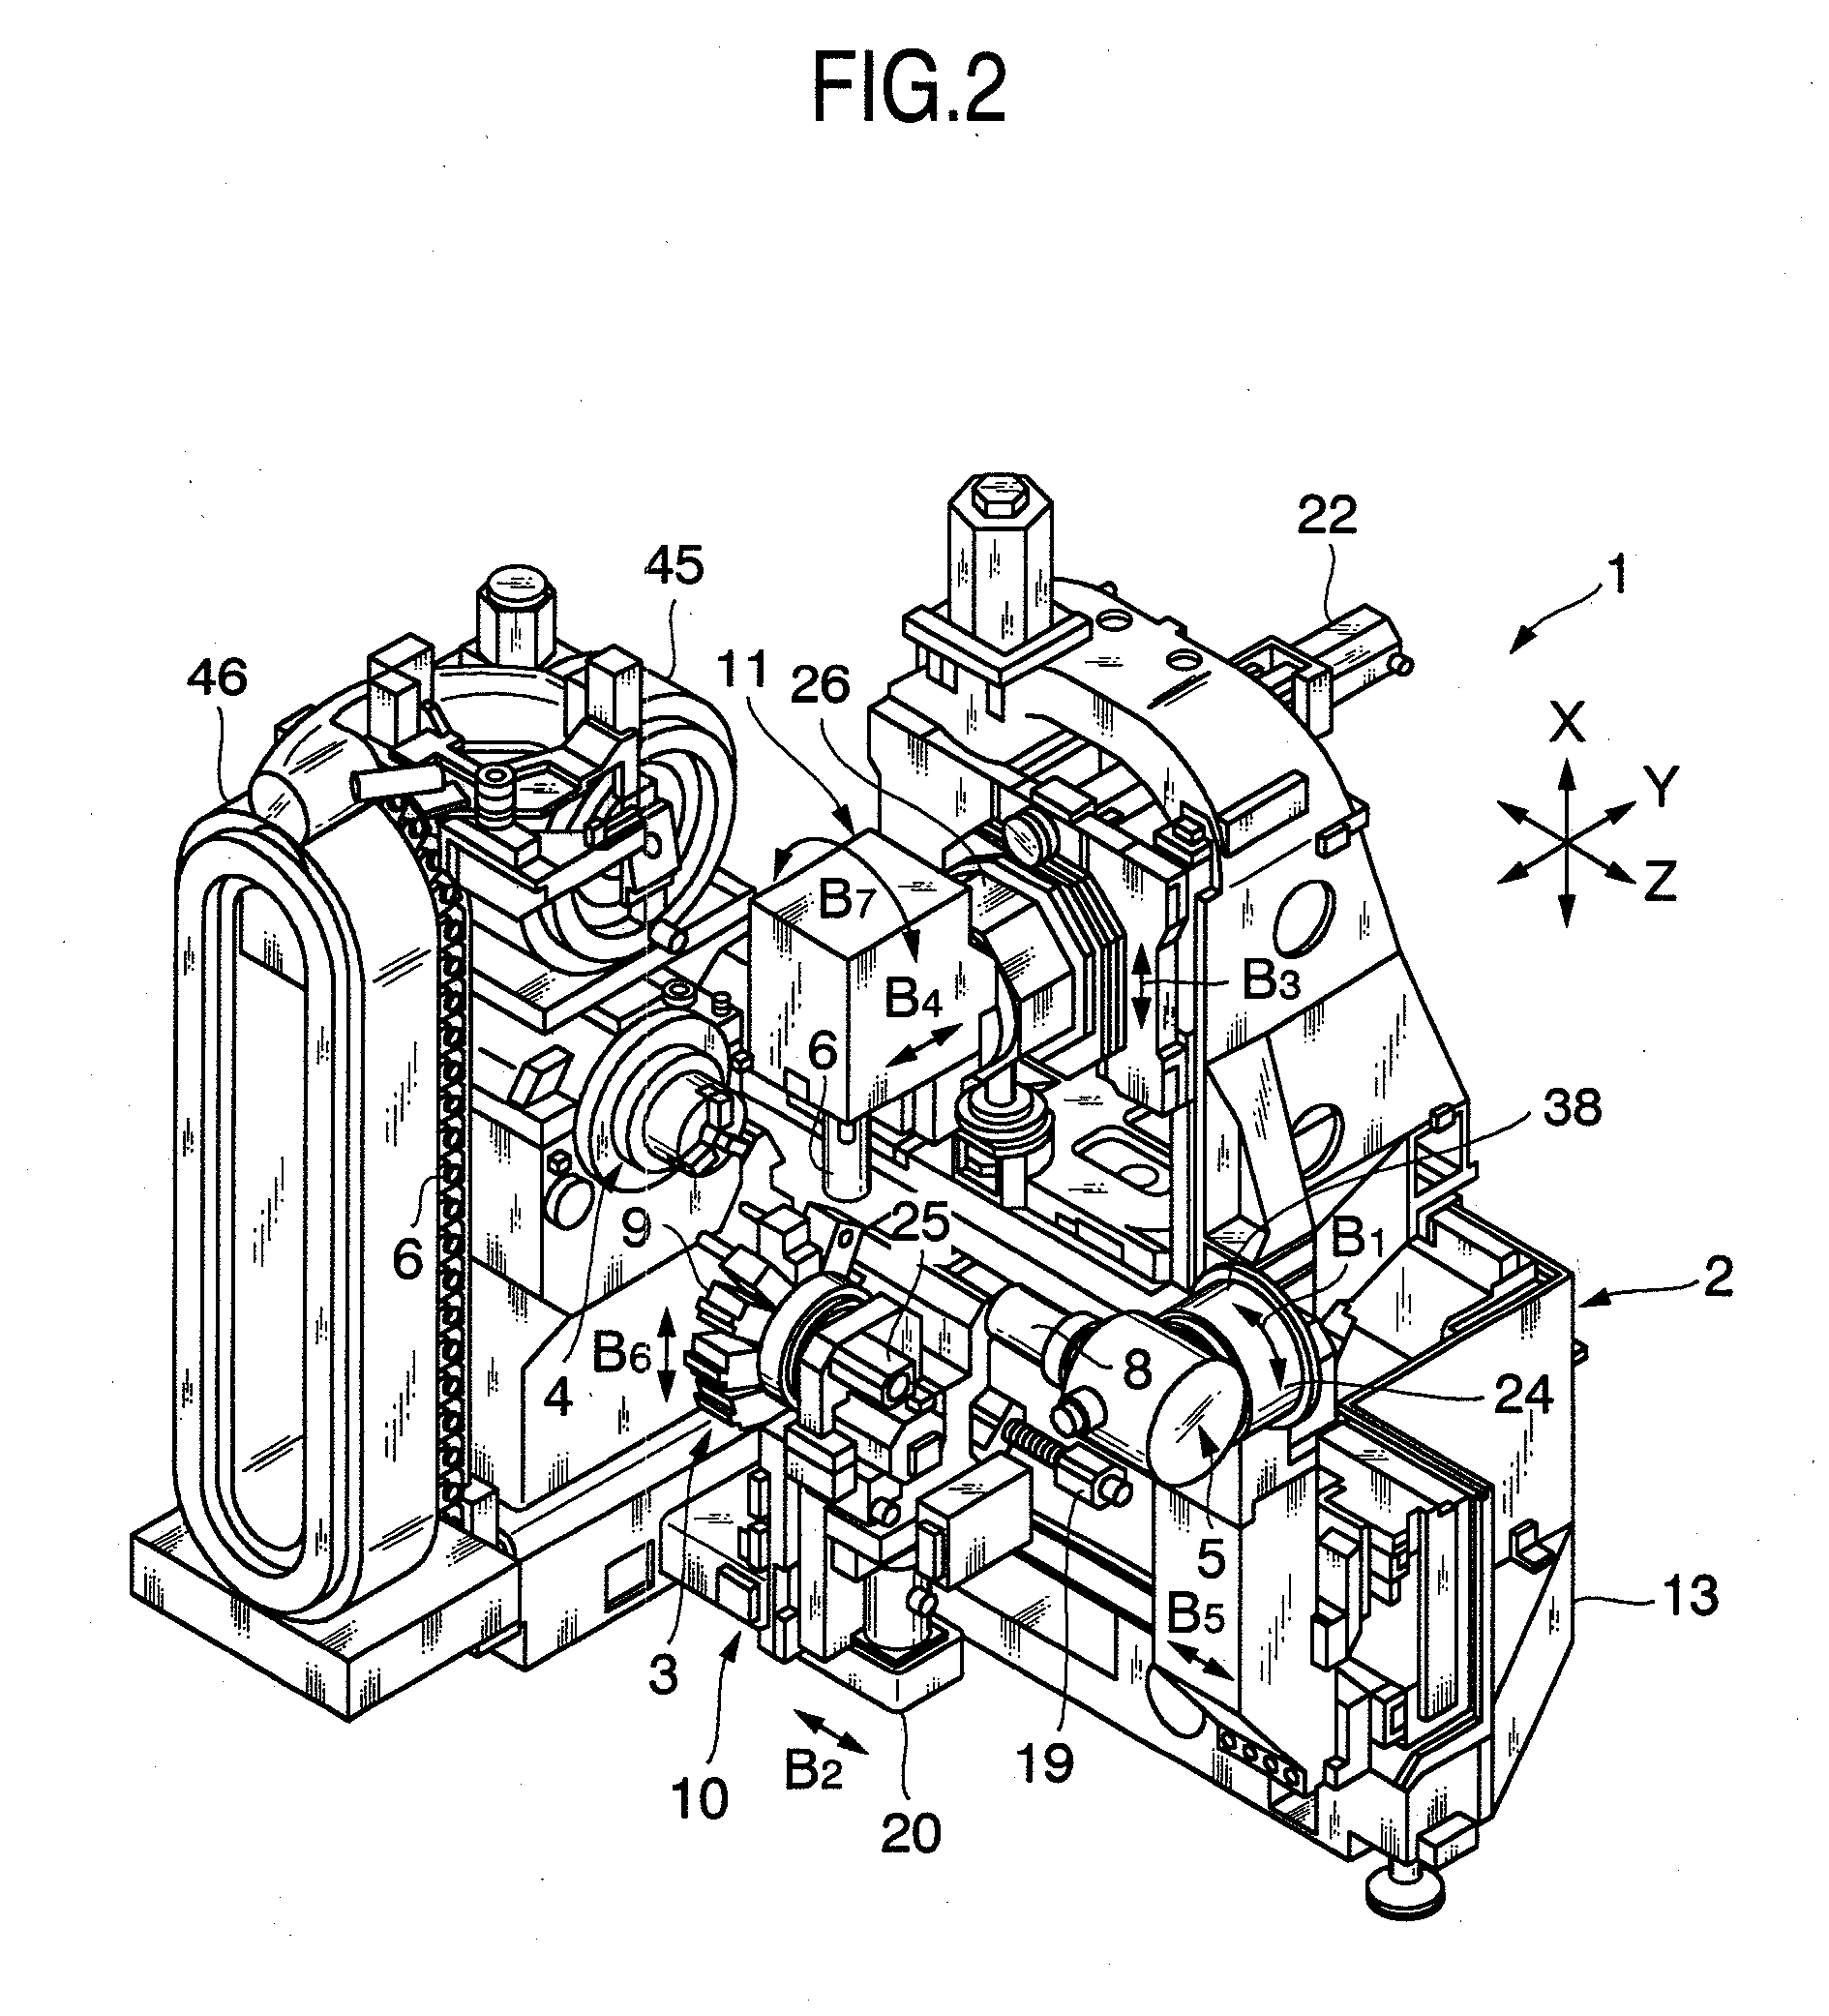 Machine tool for turning operations